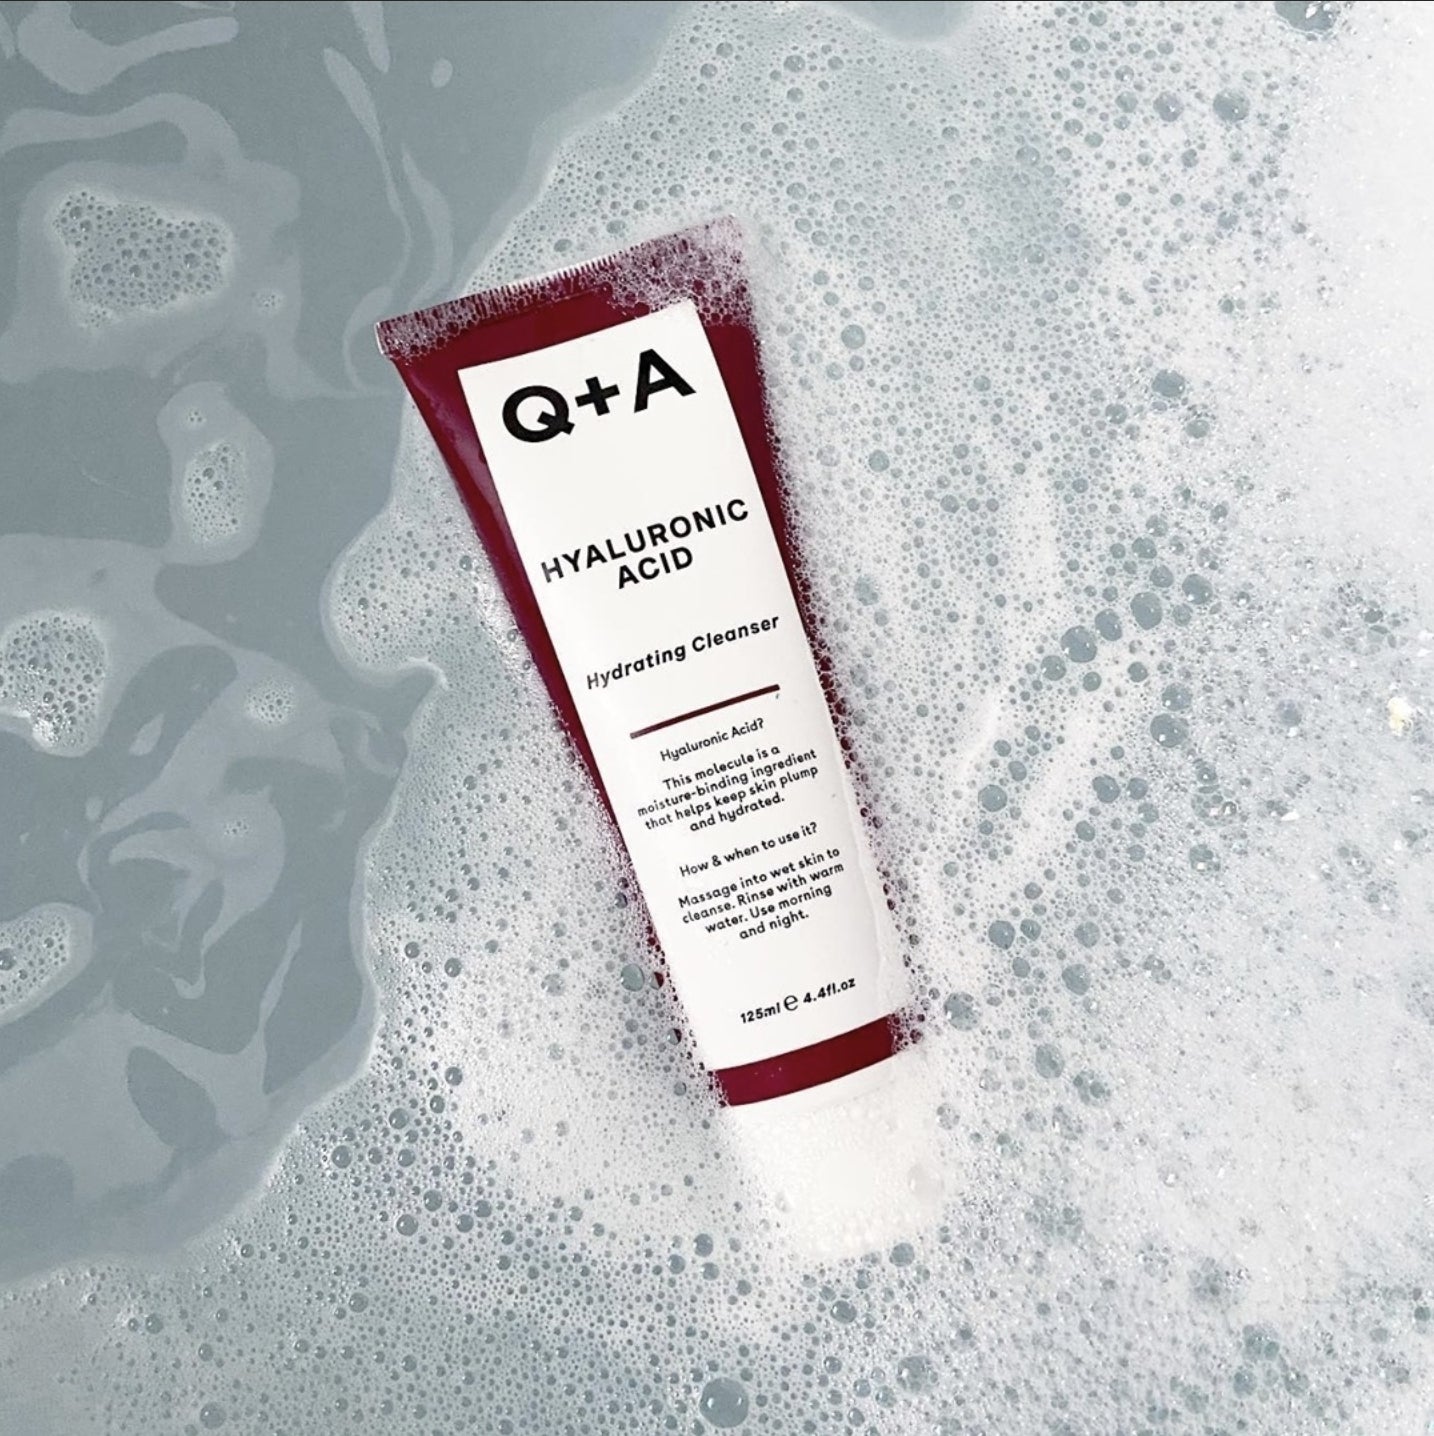 Q+A HYALURONIC ACID HYDRATING CLEANSER